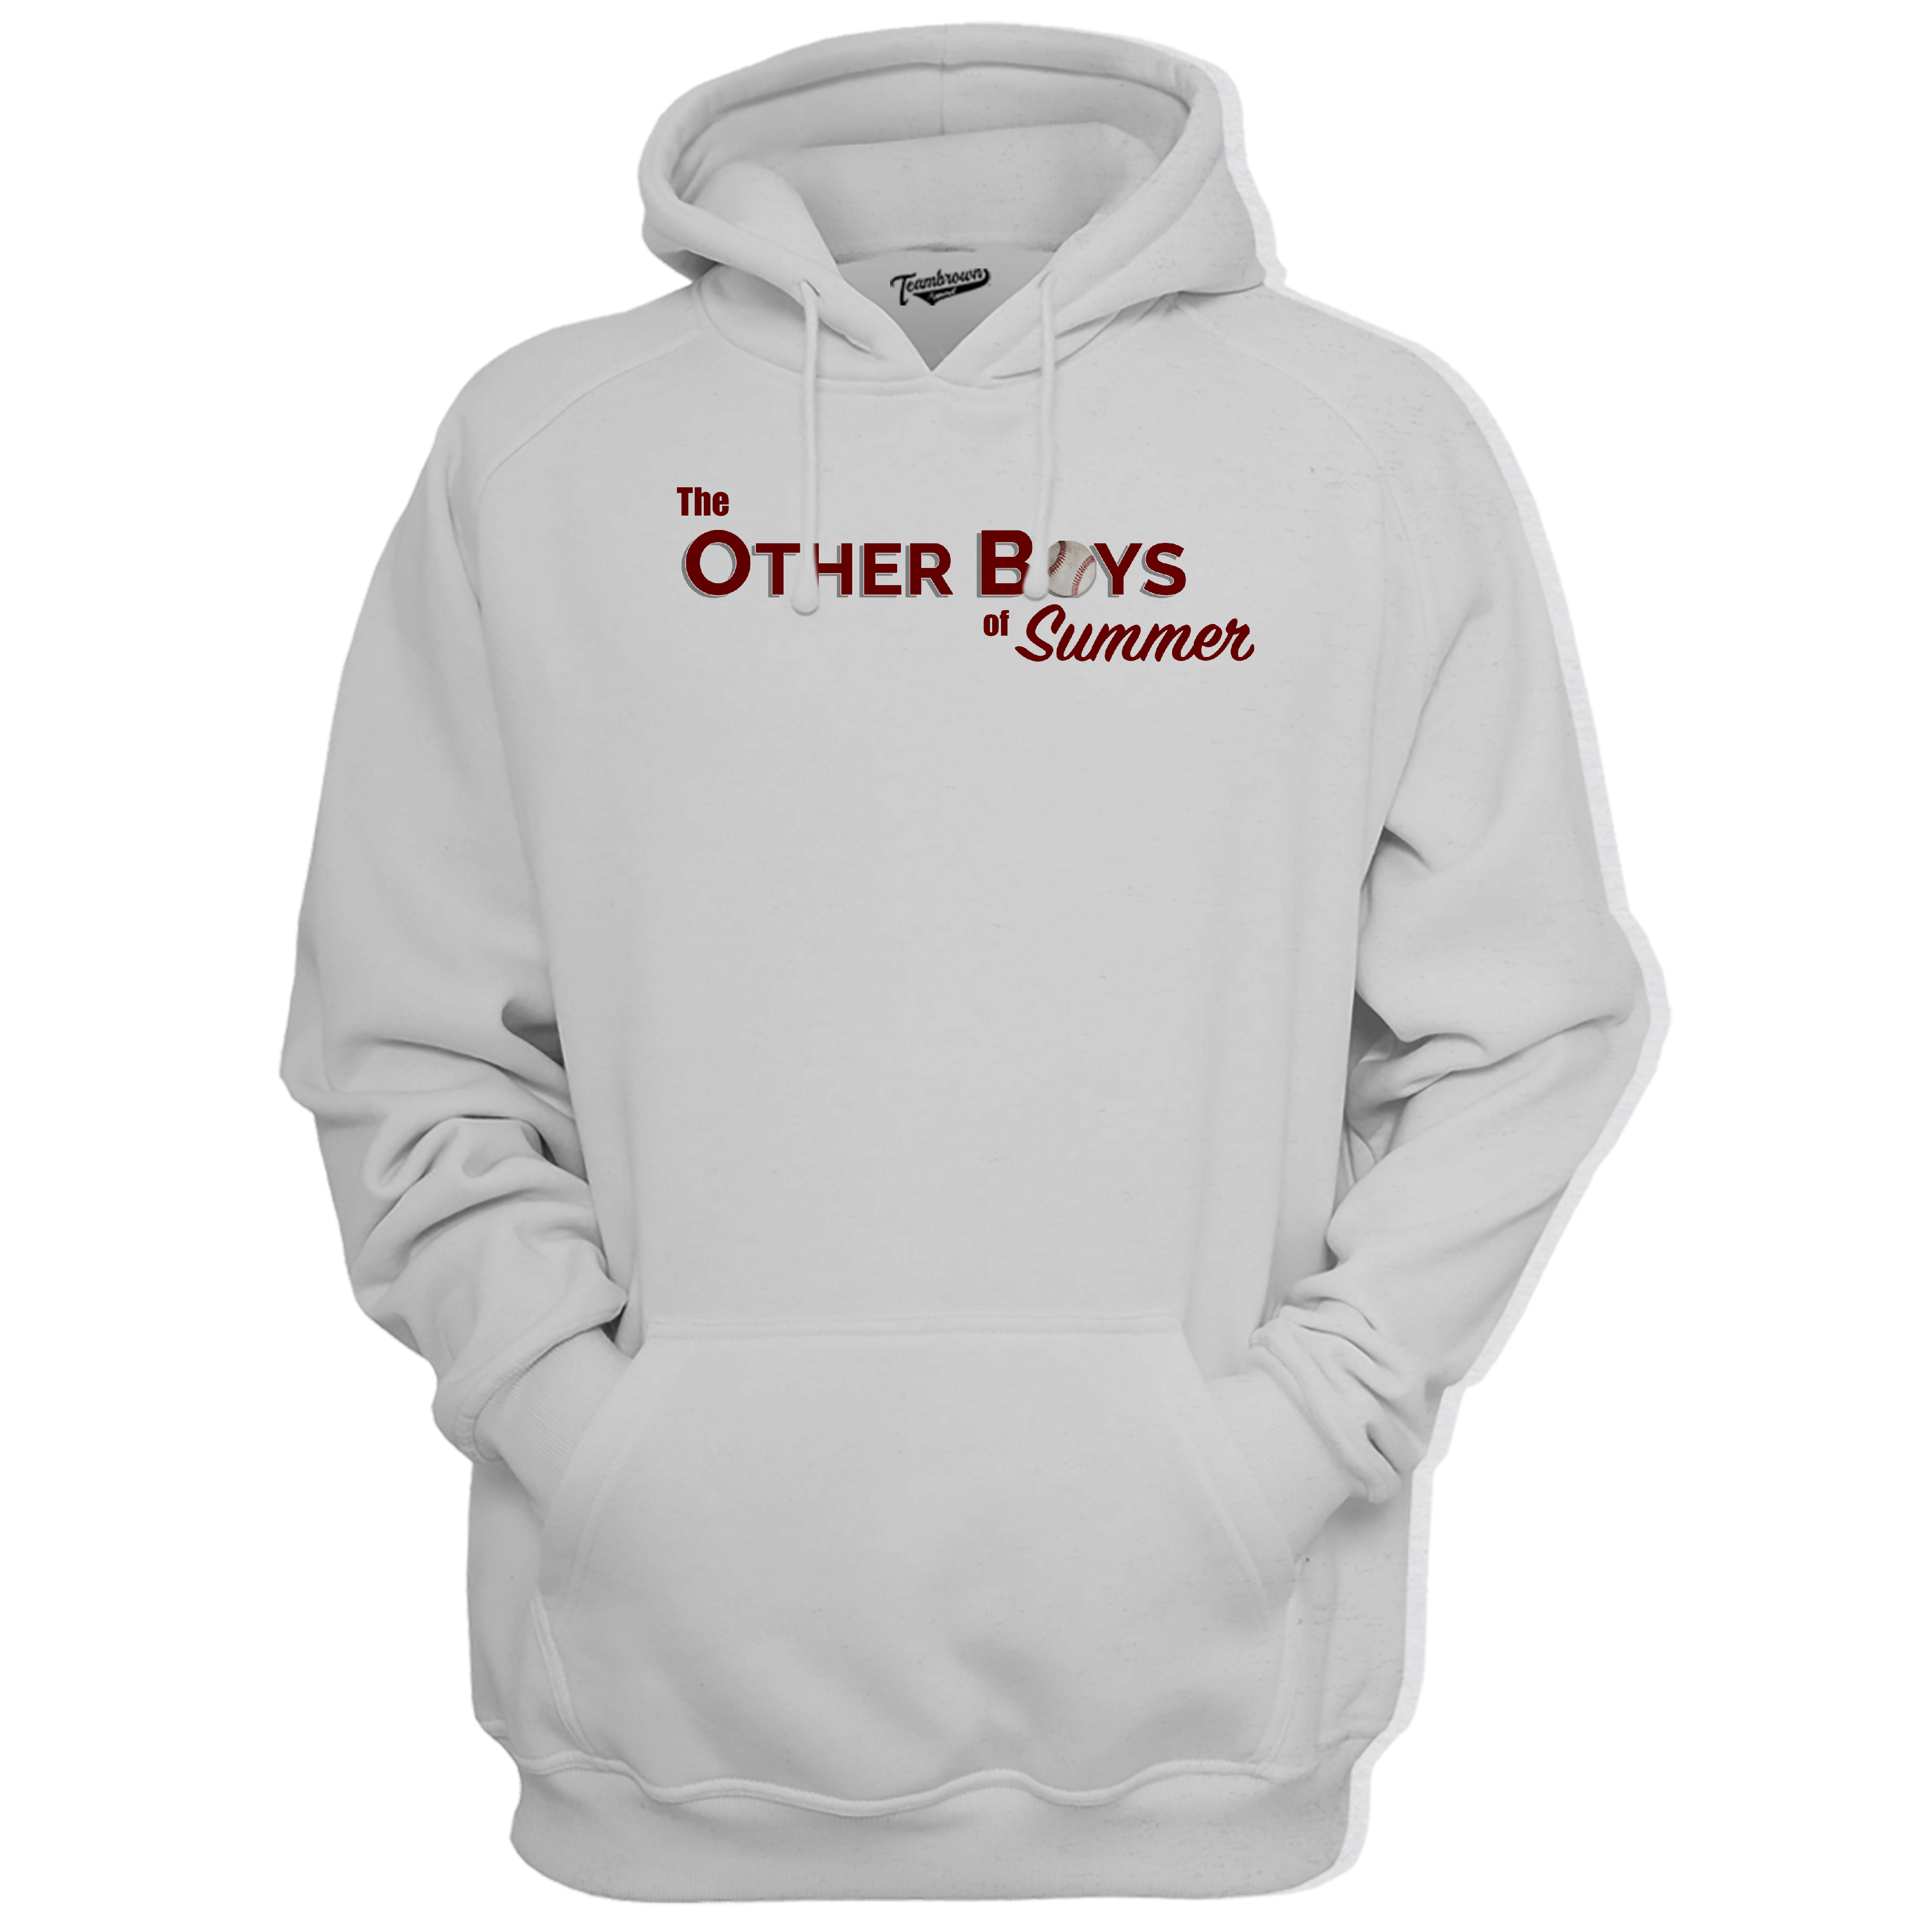 The Other Boys of Summer - Unisex Premium Hoodie | Officially Licensed - The Other Boys of Summer